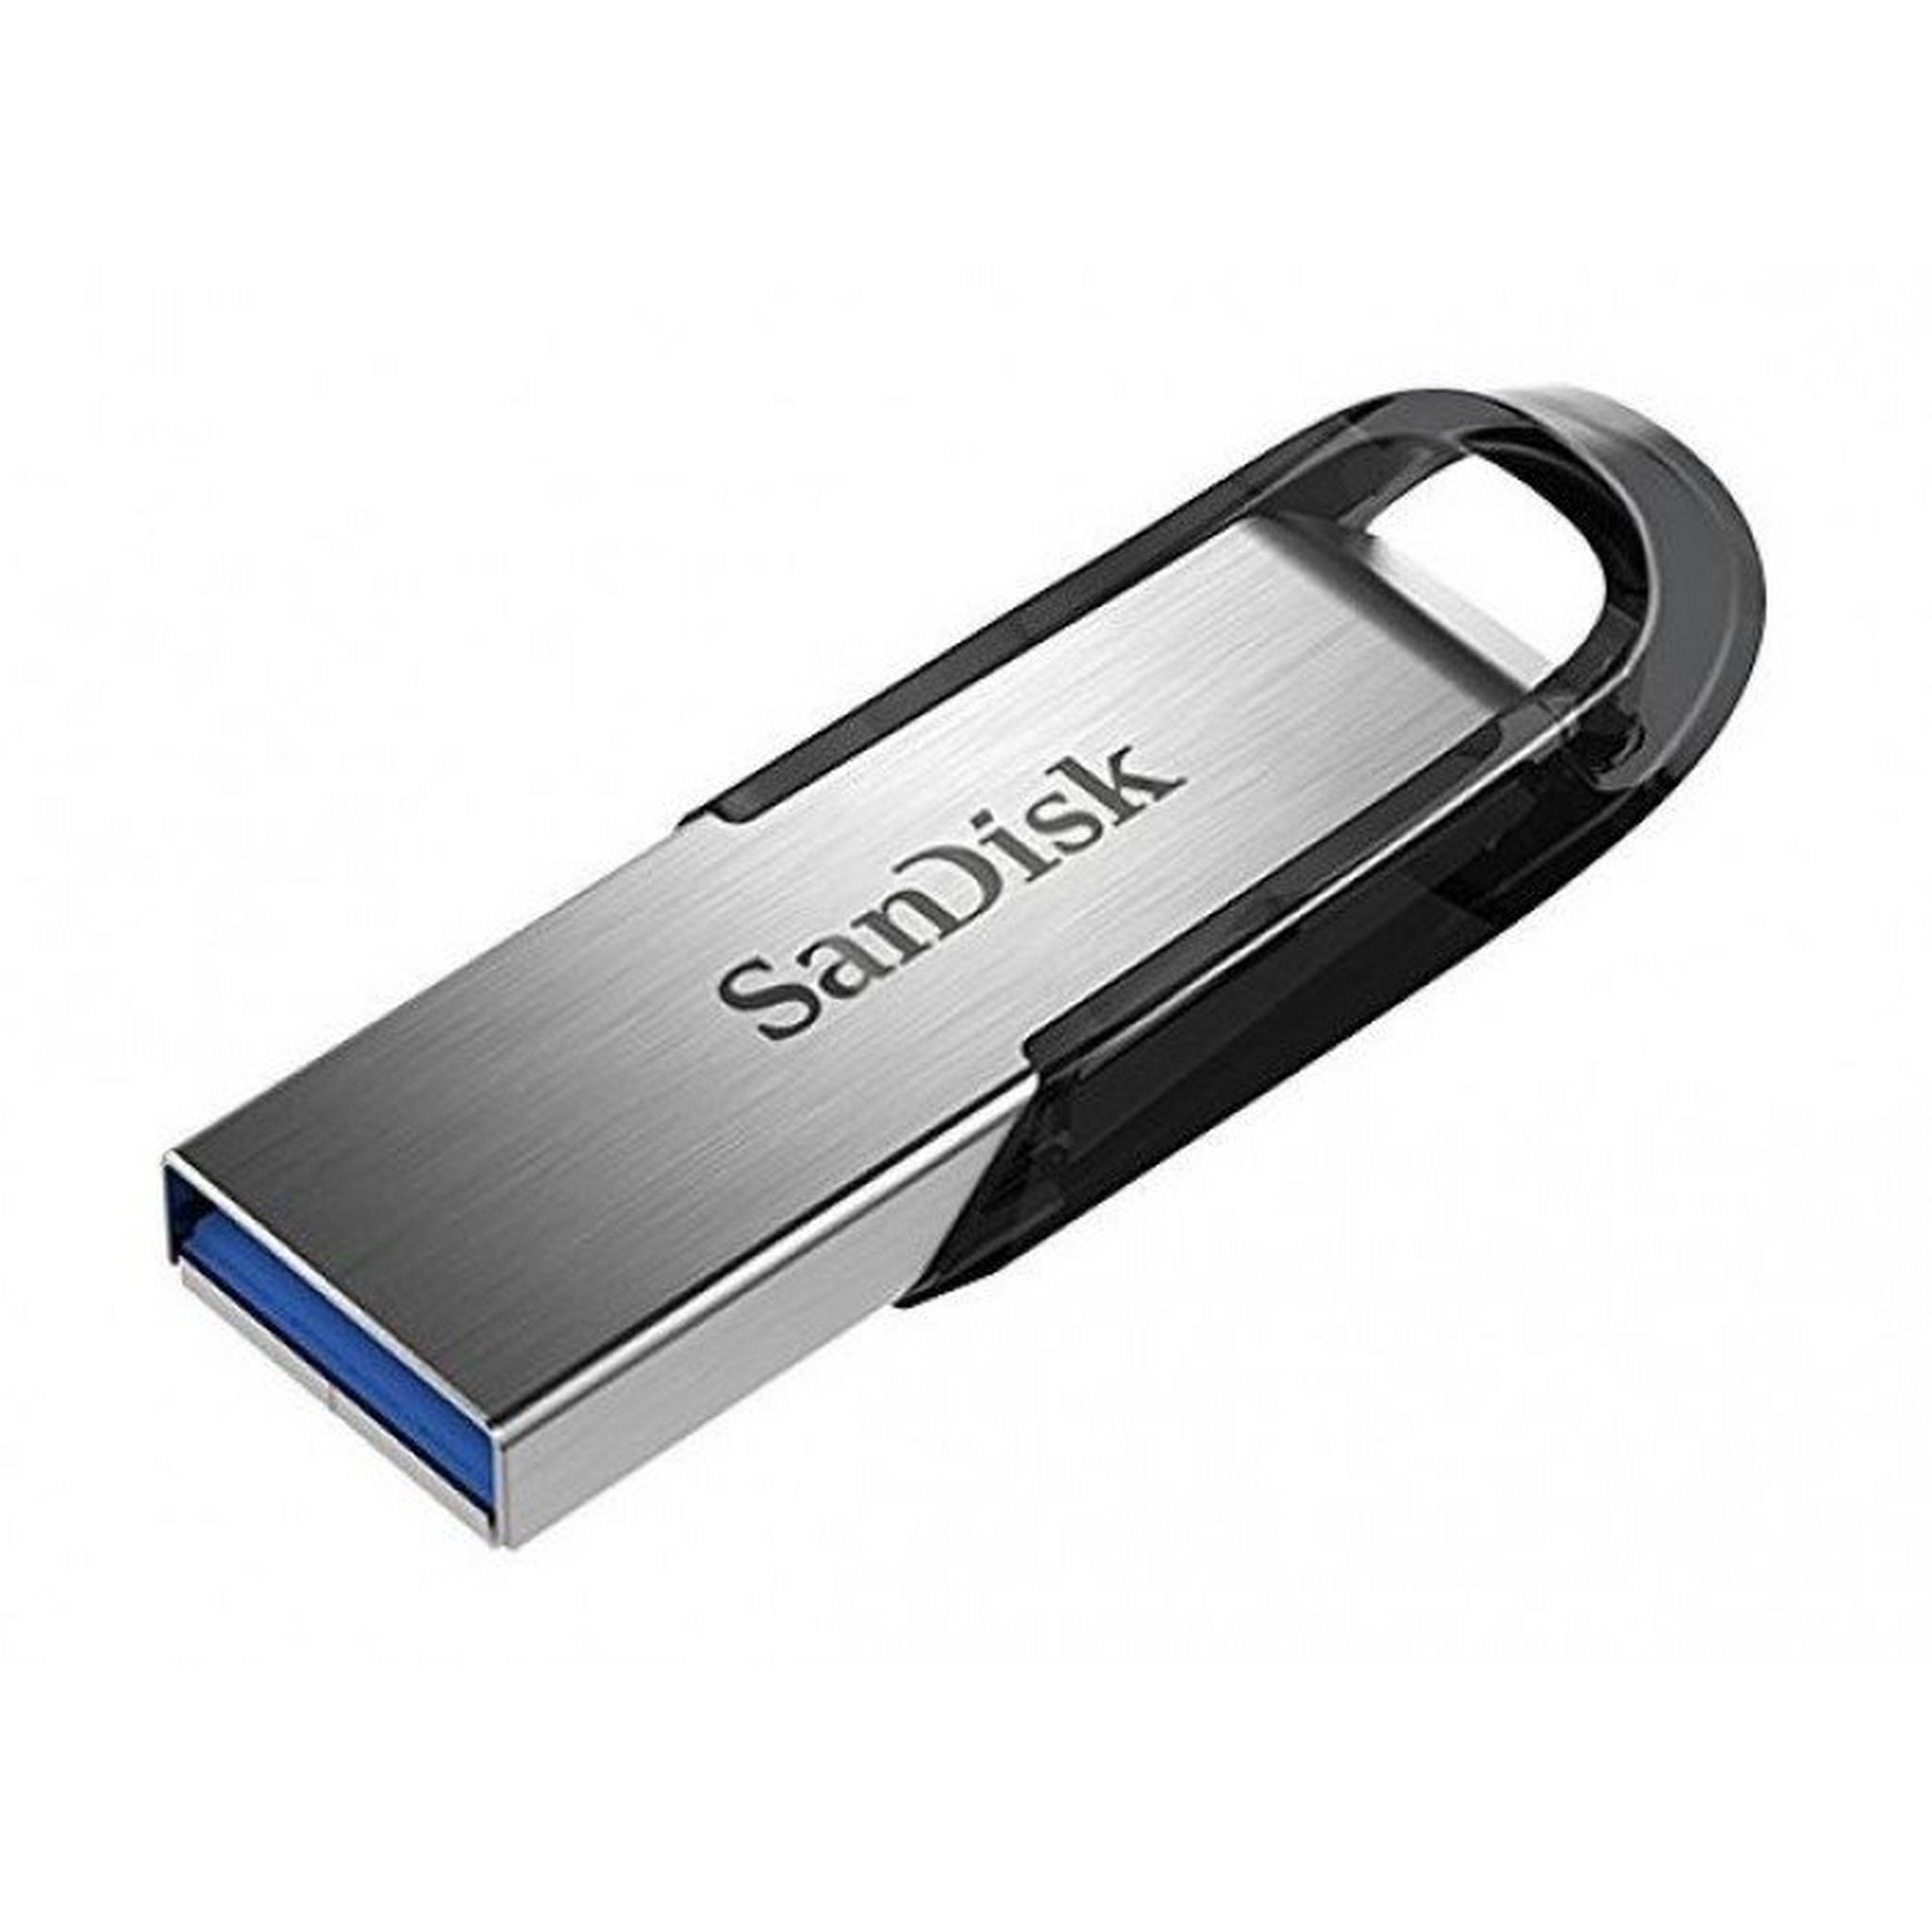 SanDisk Ultra Flair 16GB Flash Drive (Pack of 2)